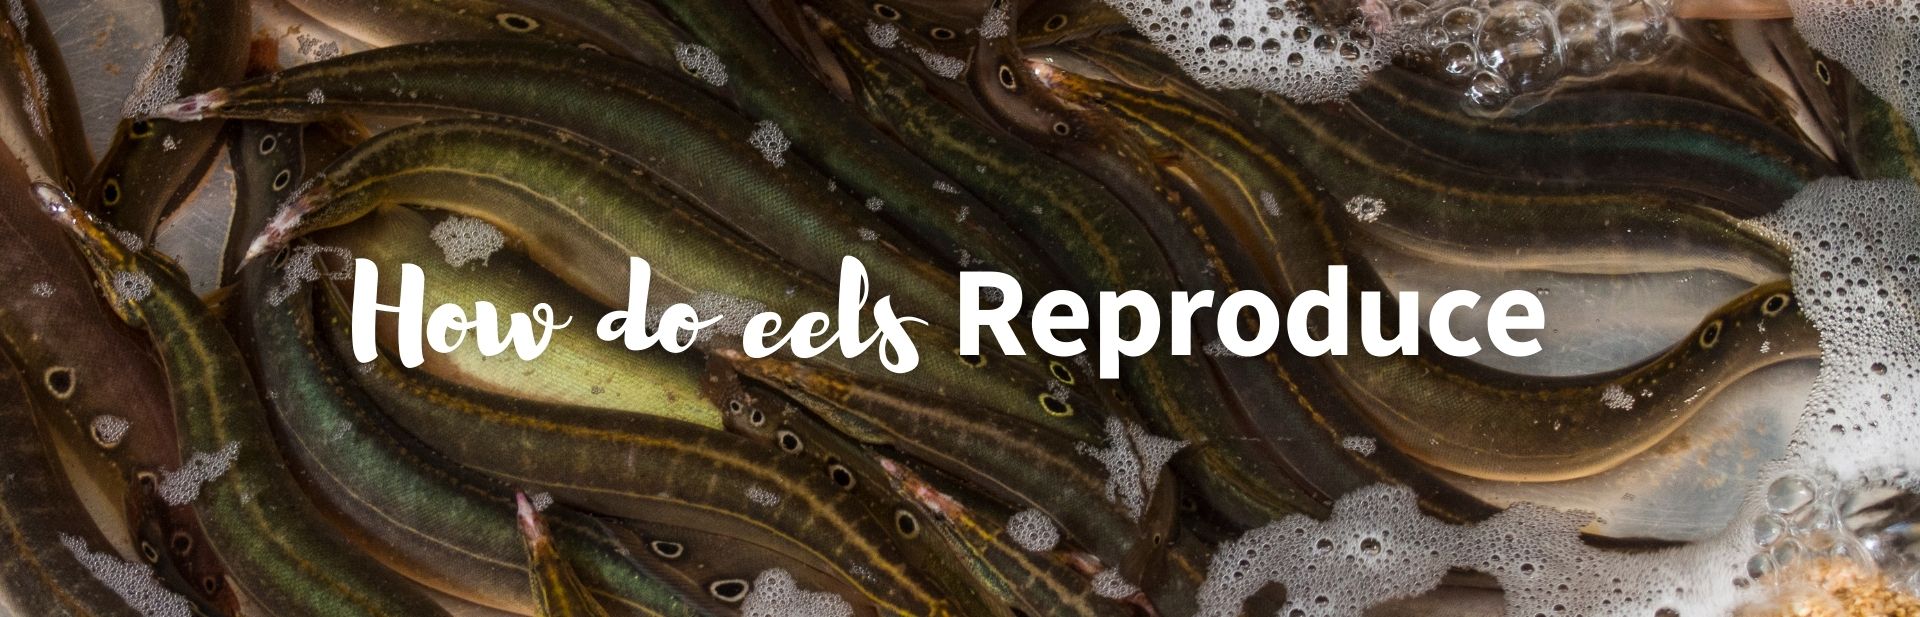 How Do Eels Reproduce? The Mystery of Eel Sex Explained